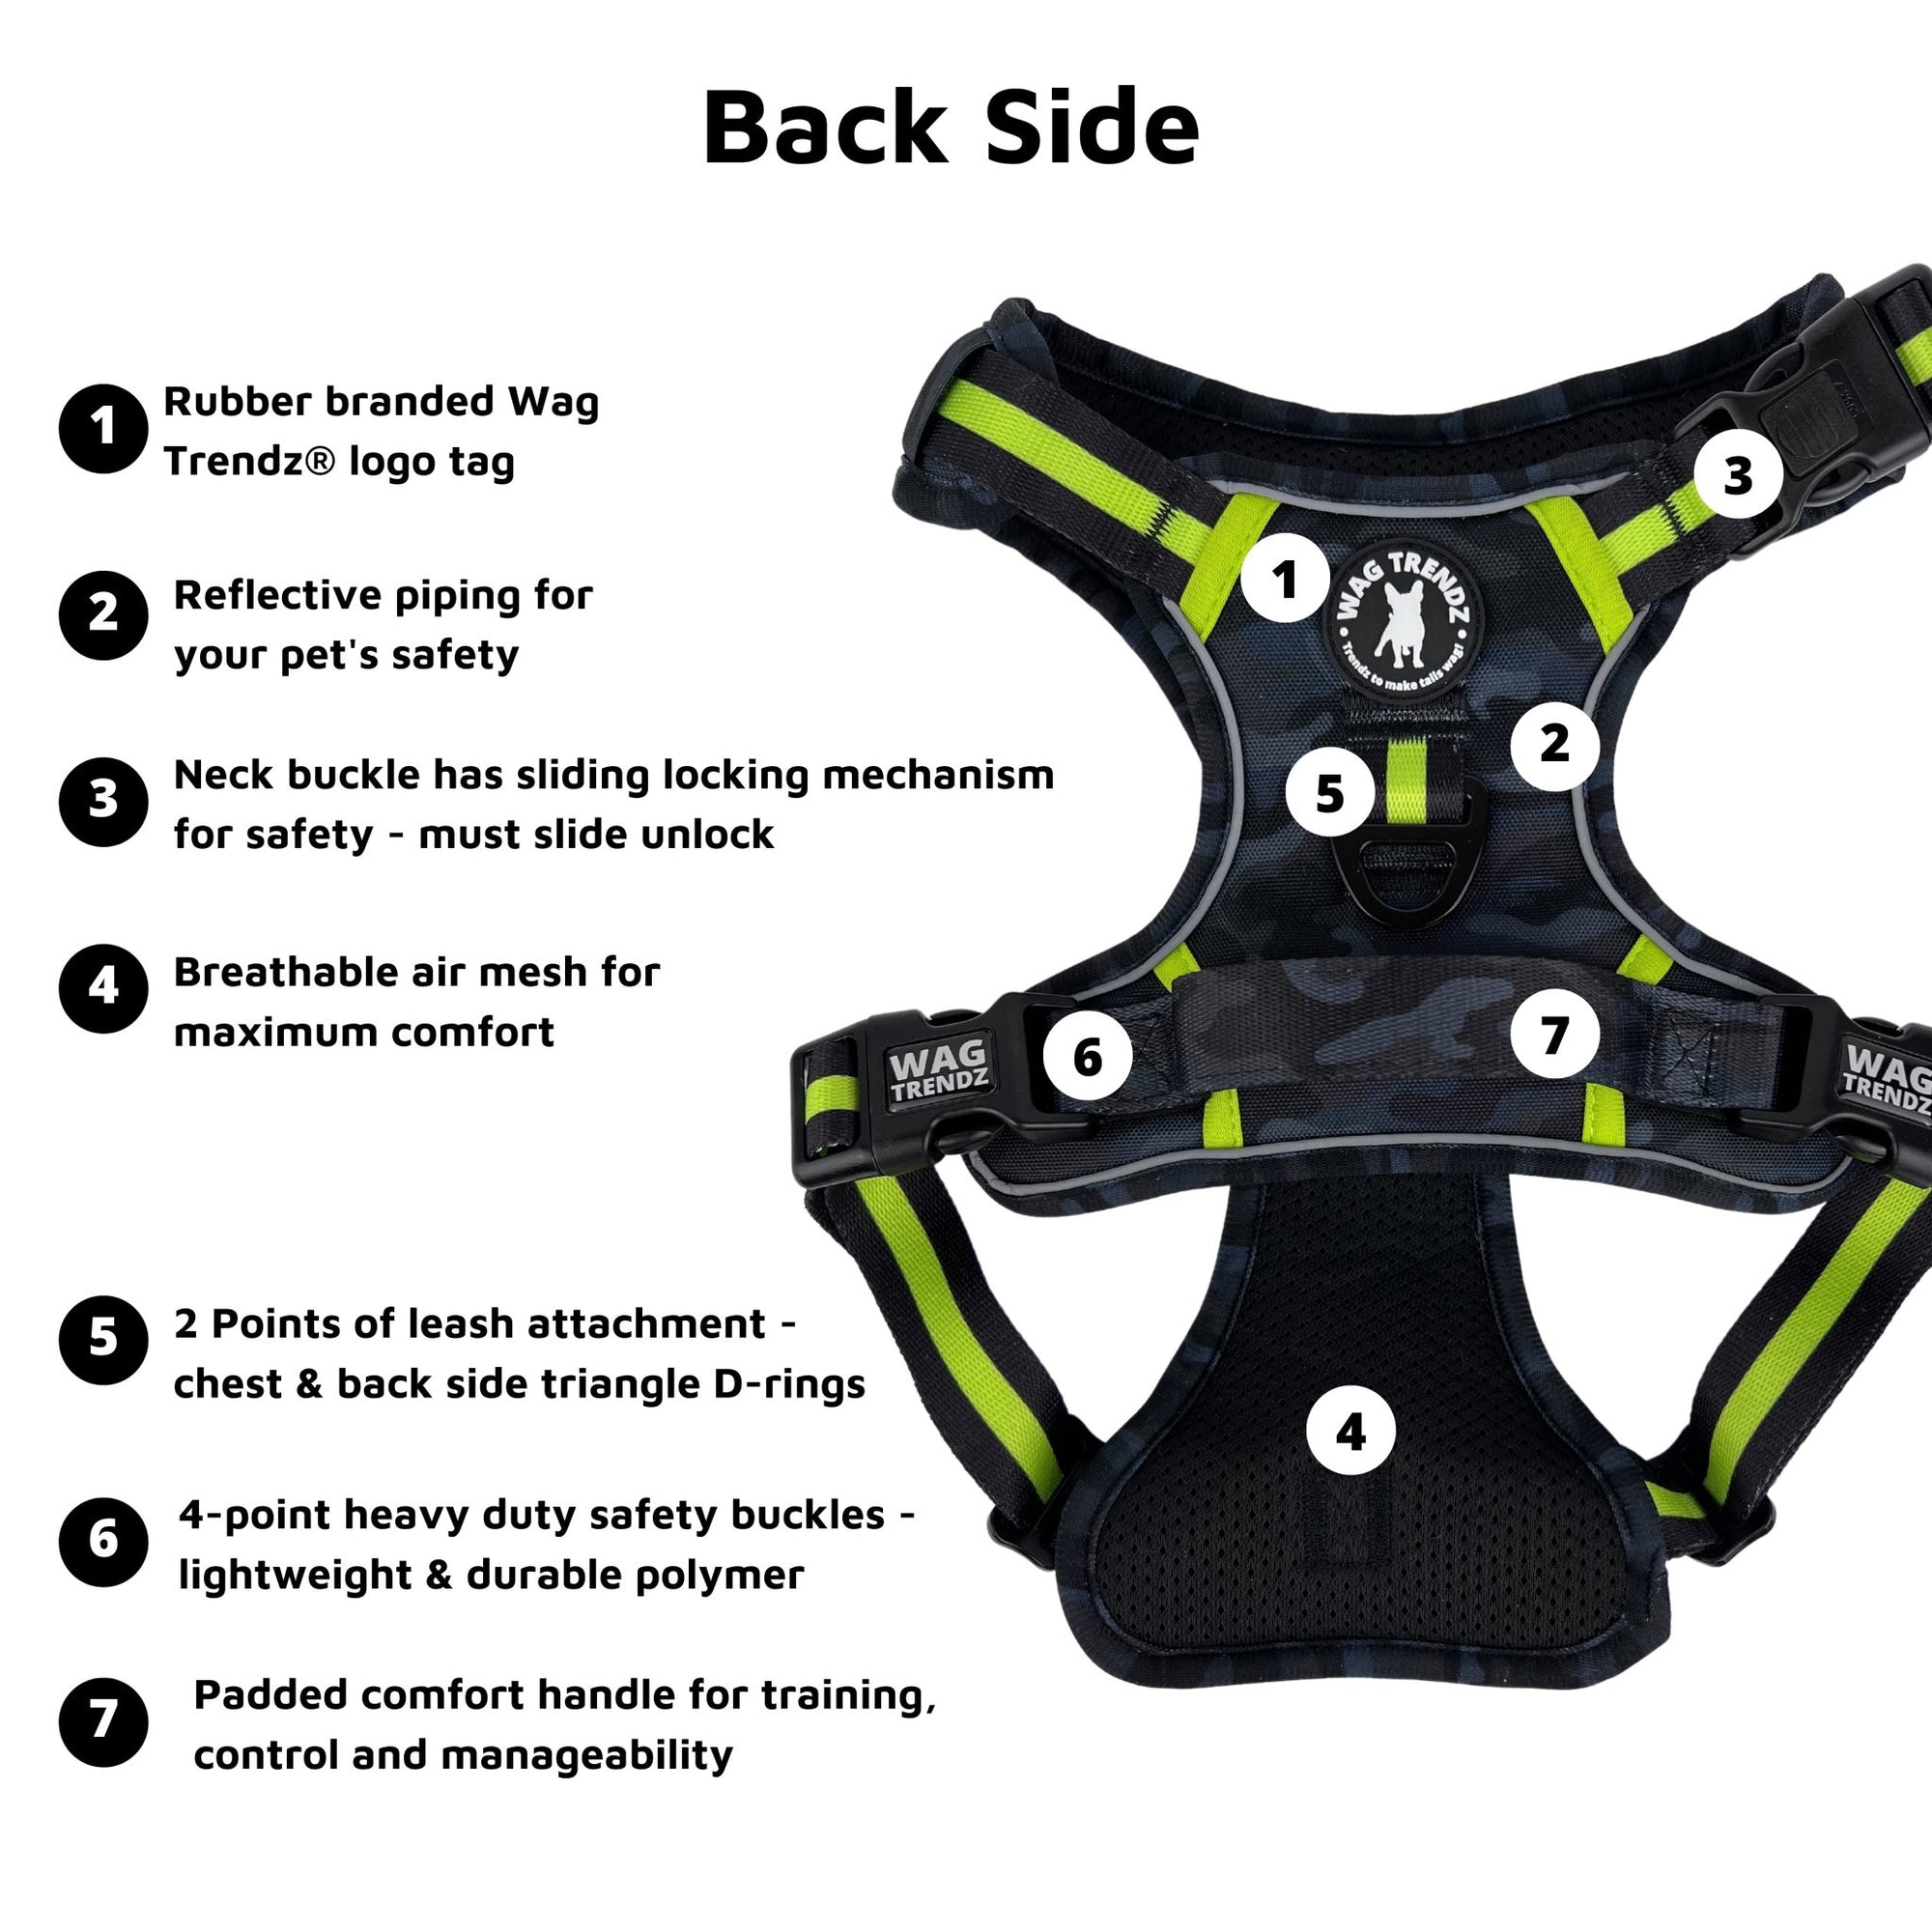 Dog Harness and Leash Set + Poo Bag Holder - black and gray camo no pull harness with high visibility accents - back view - against solid white background - Wag Trendz